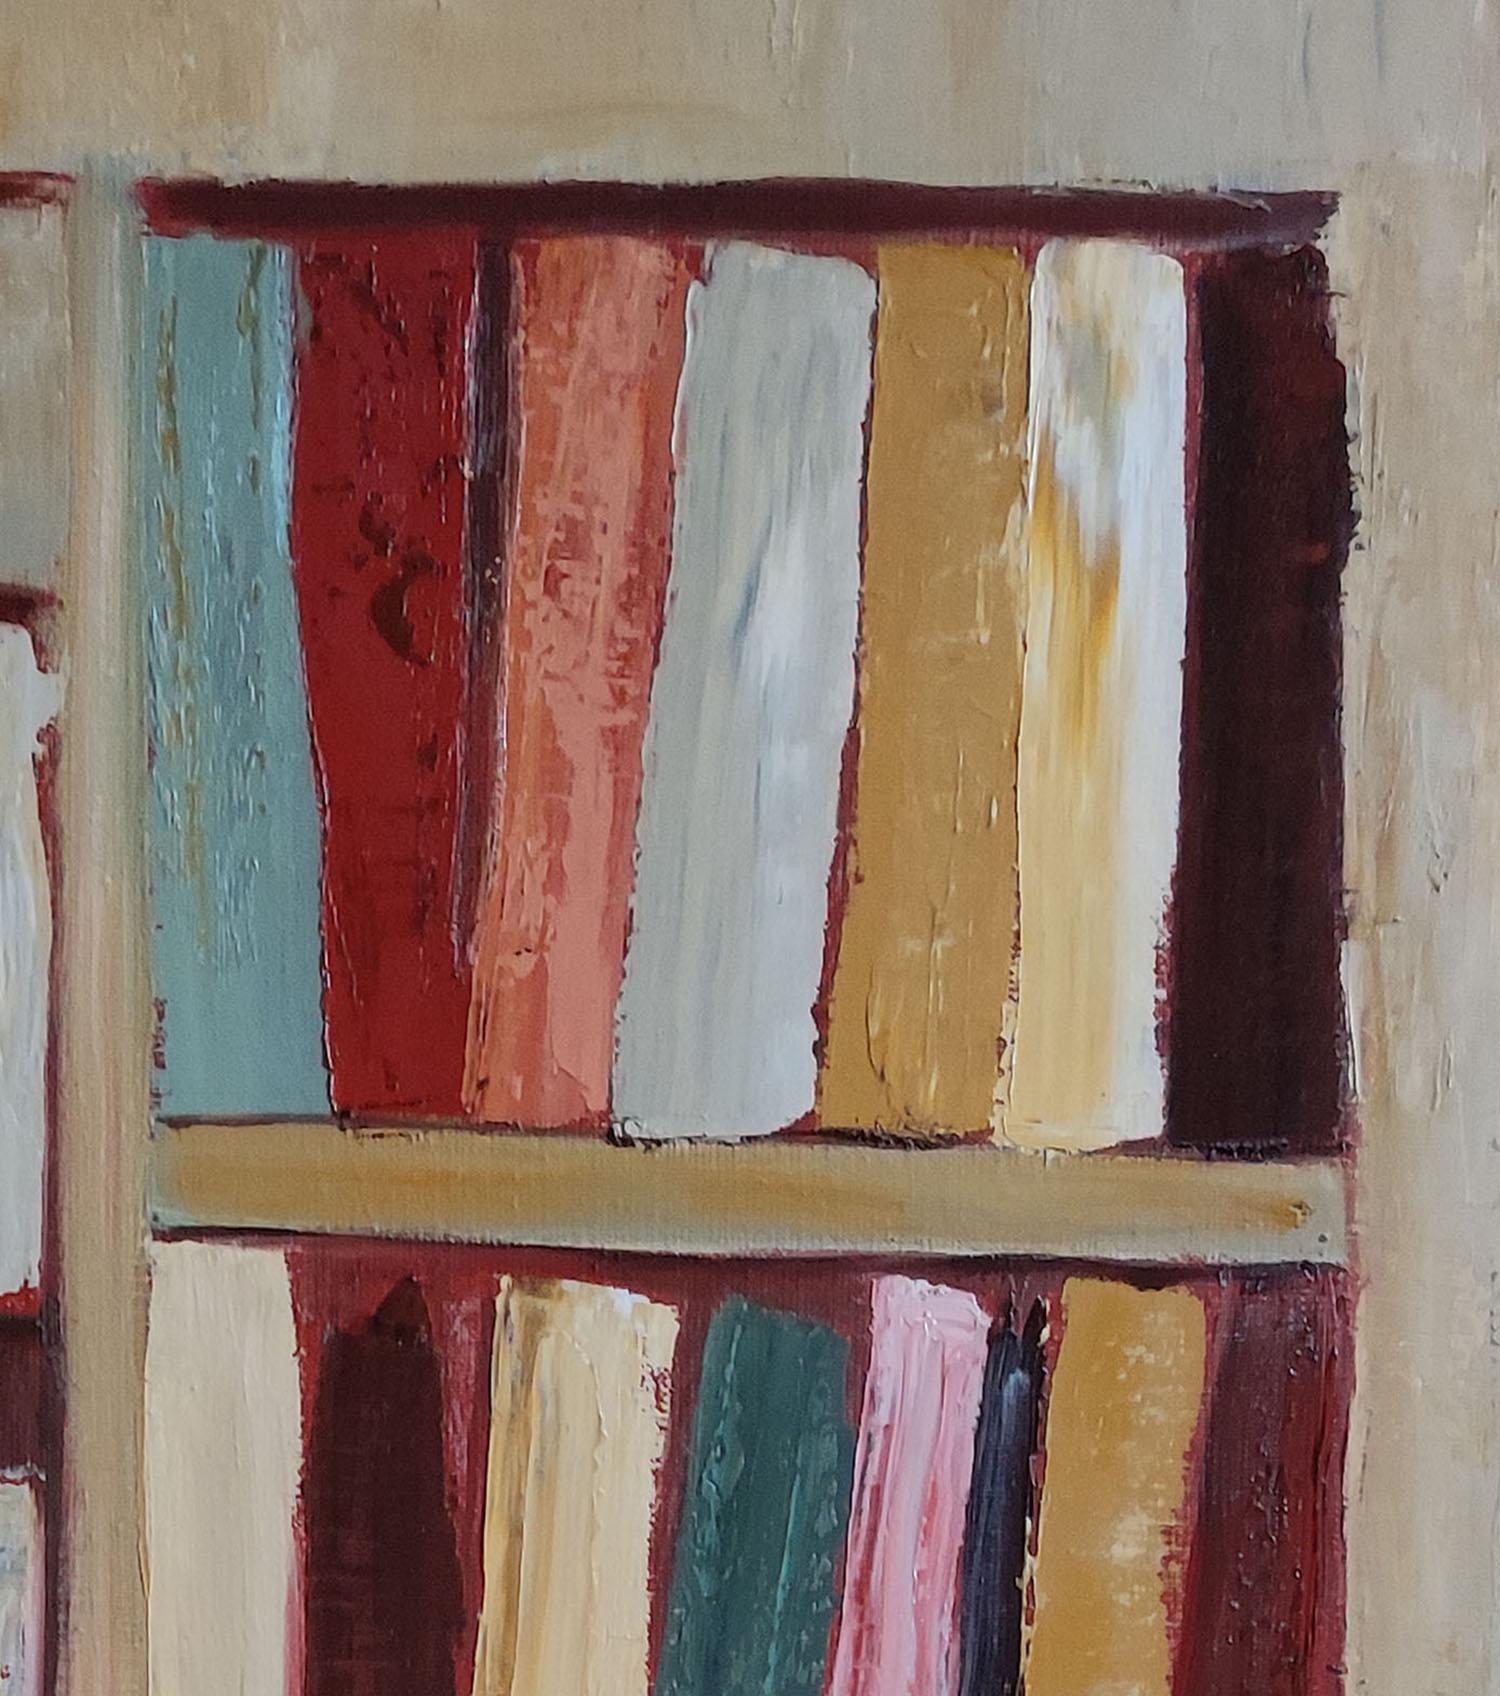 tales, abstract geometric still life, books, library, oil on canvas, modern - Painting by SOPHIE DUMONT